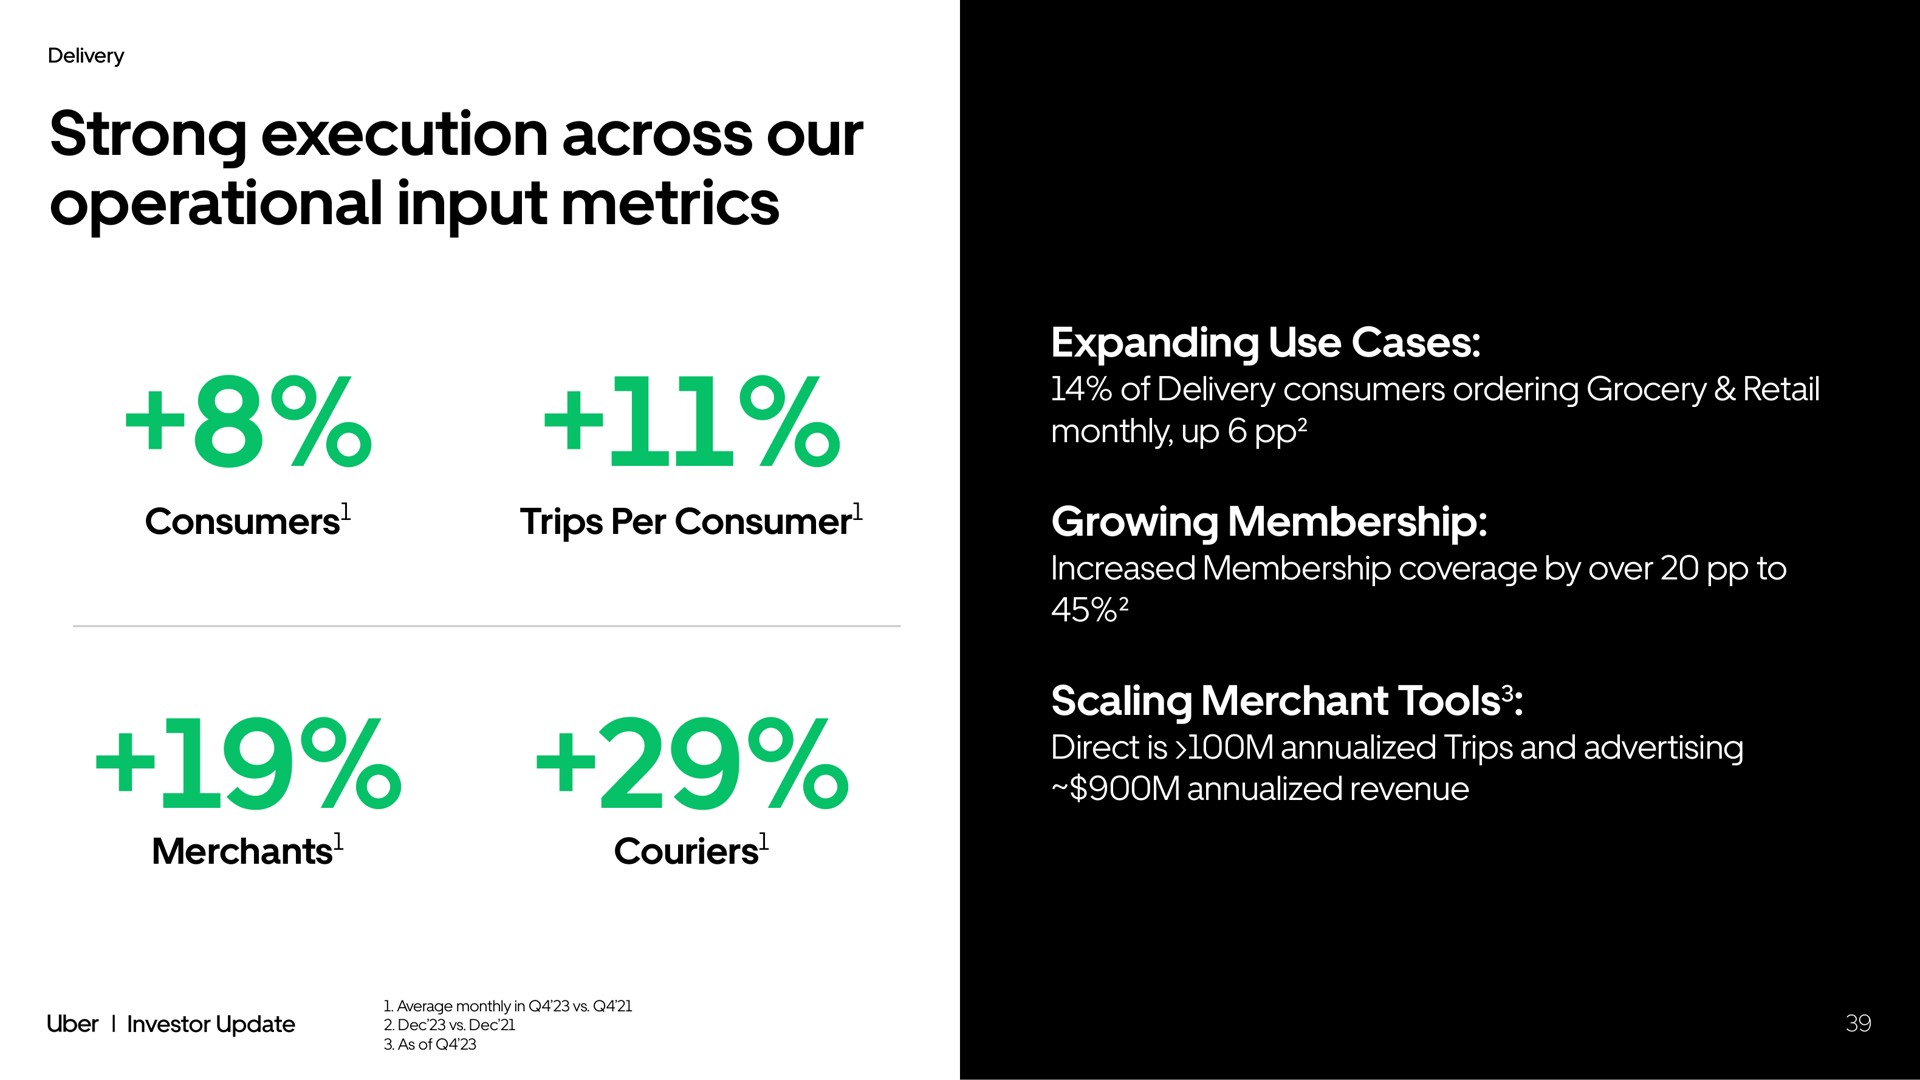 strong execution across our operational input metrics consumers trips per consumer merchants couriers expanding use cases growing membership scaling merchant tools | Uber